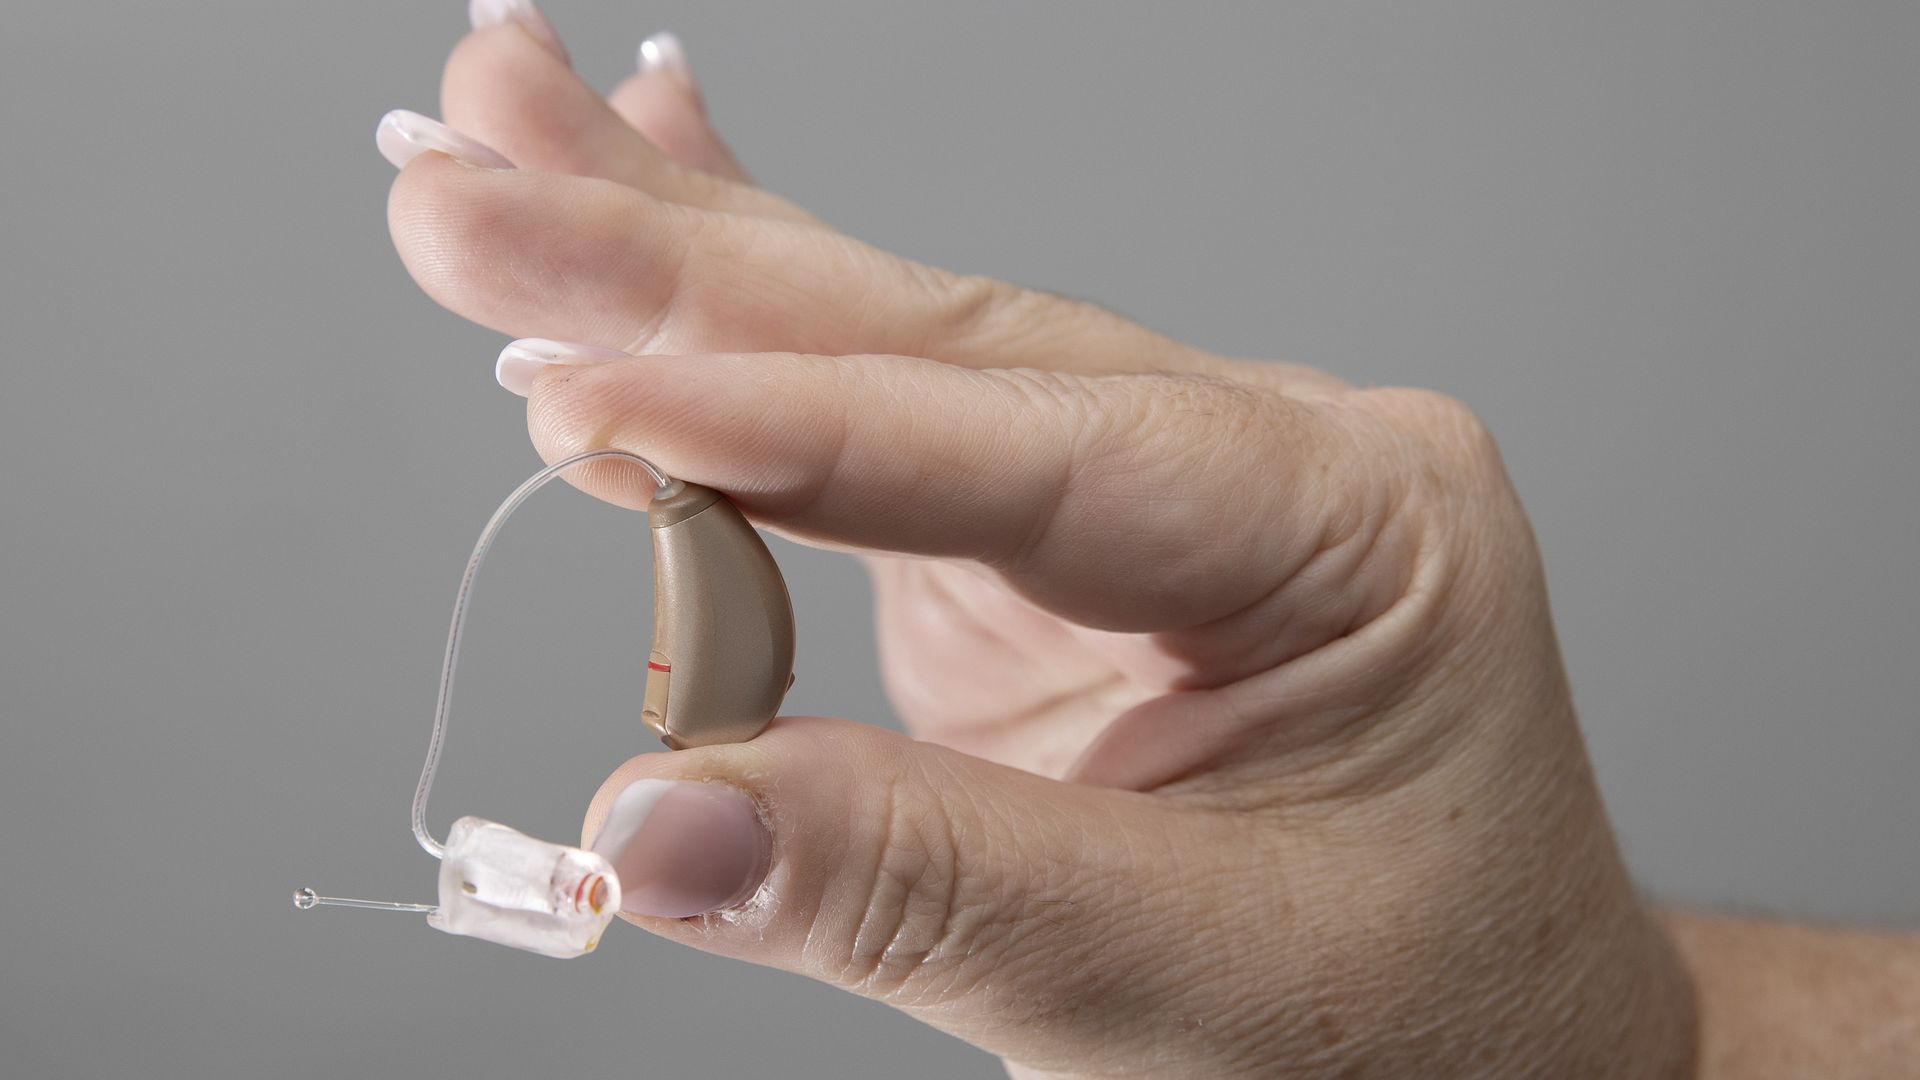 A hand holds a hearing aid